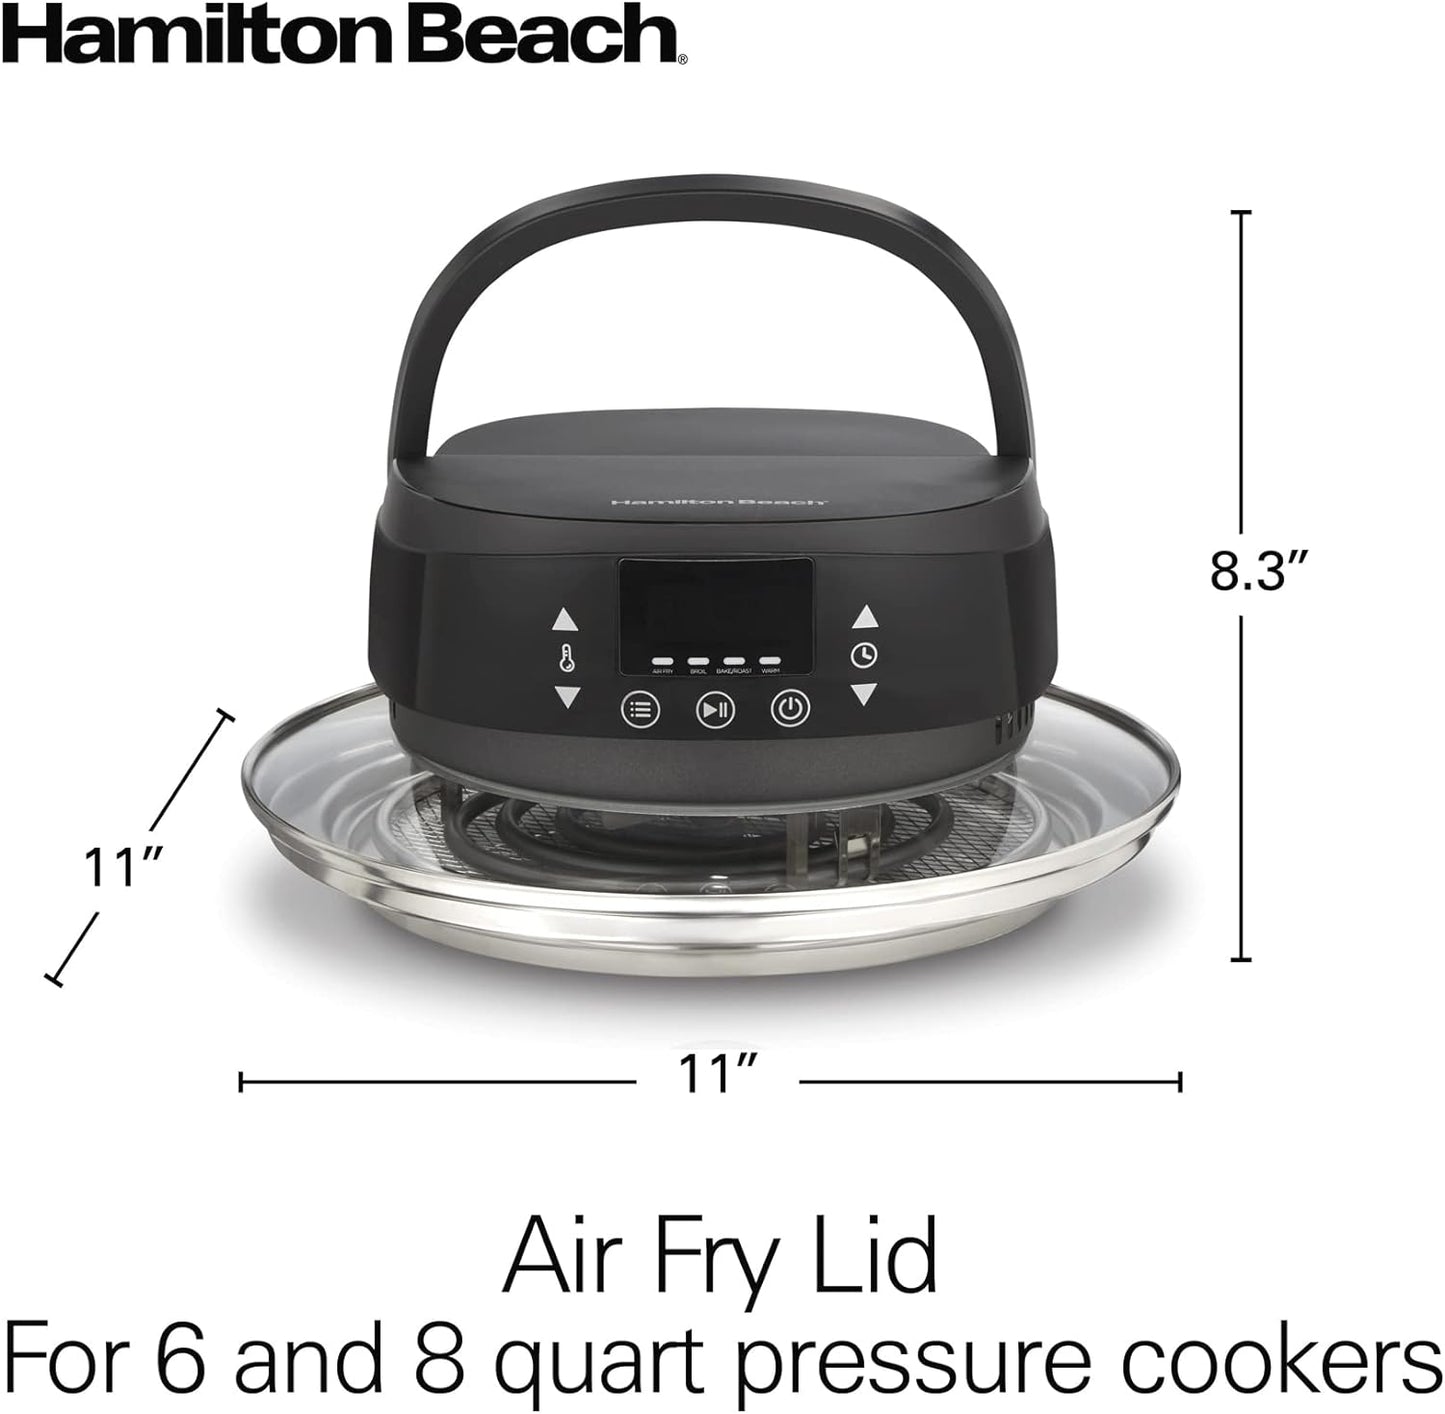 Hamilton Beach 34510 Air Fry Lid for 6 and 8 Quart Pressure Cookers Compatible with Other Leading Brands, Black